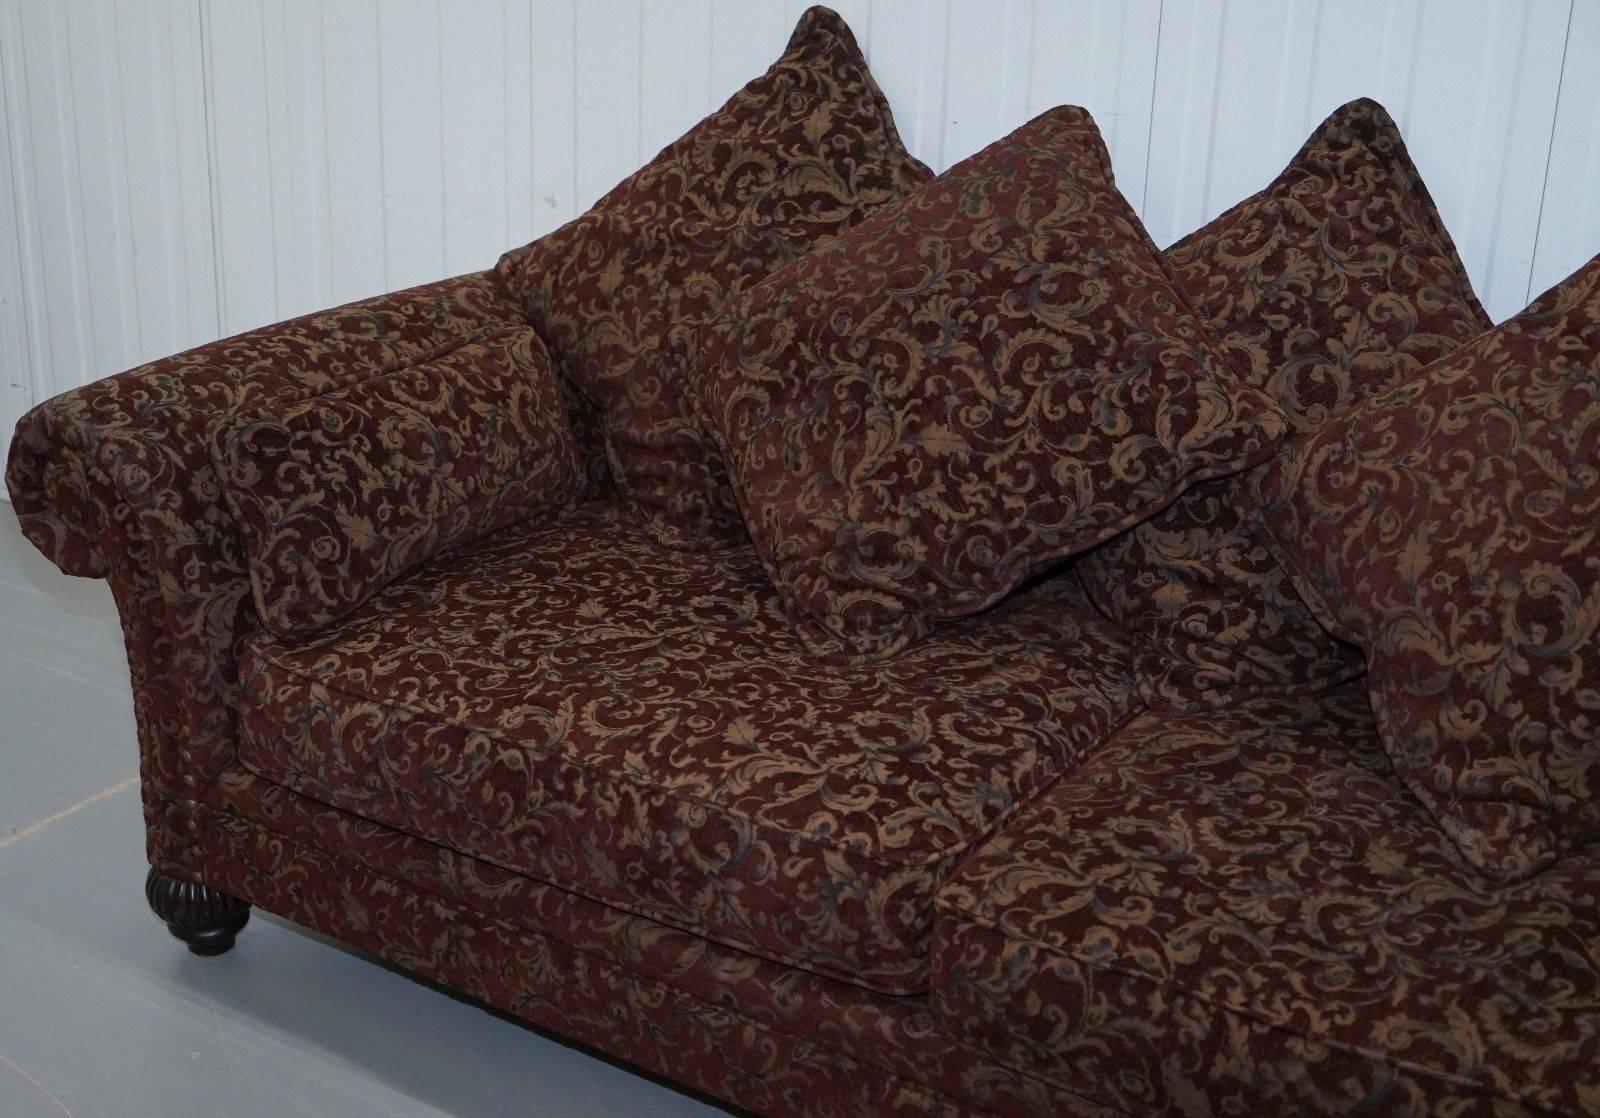 We are delighted to offer for sale this RRP £8000 Bernhardt three-four seat sofa with feather filled cushions

An exceptionally comfortable and good looking well-made sofa, the upholstery is in very good order throughout

The base cushions are